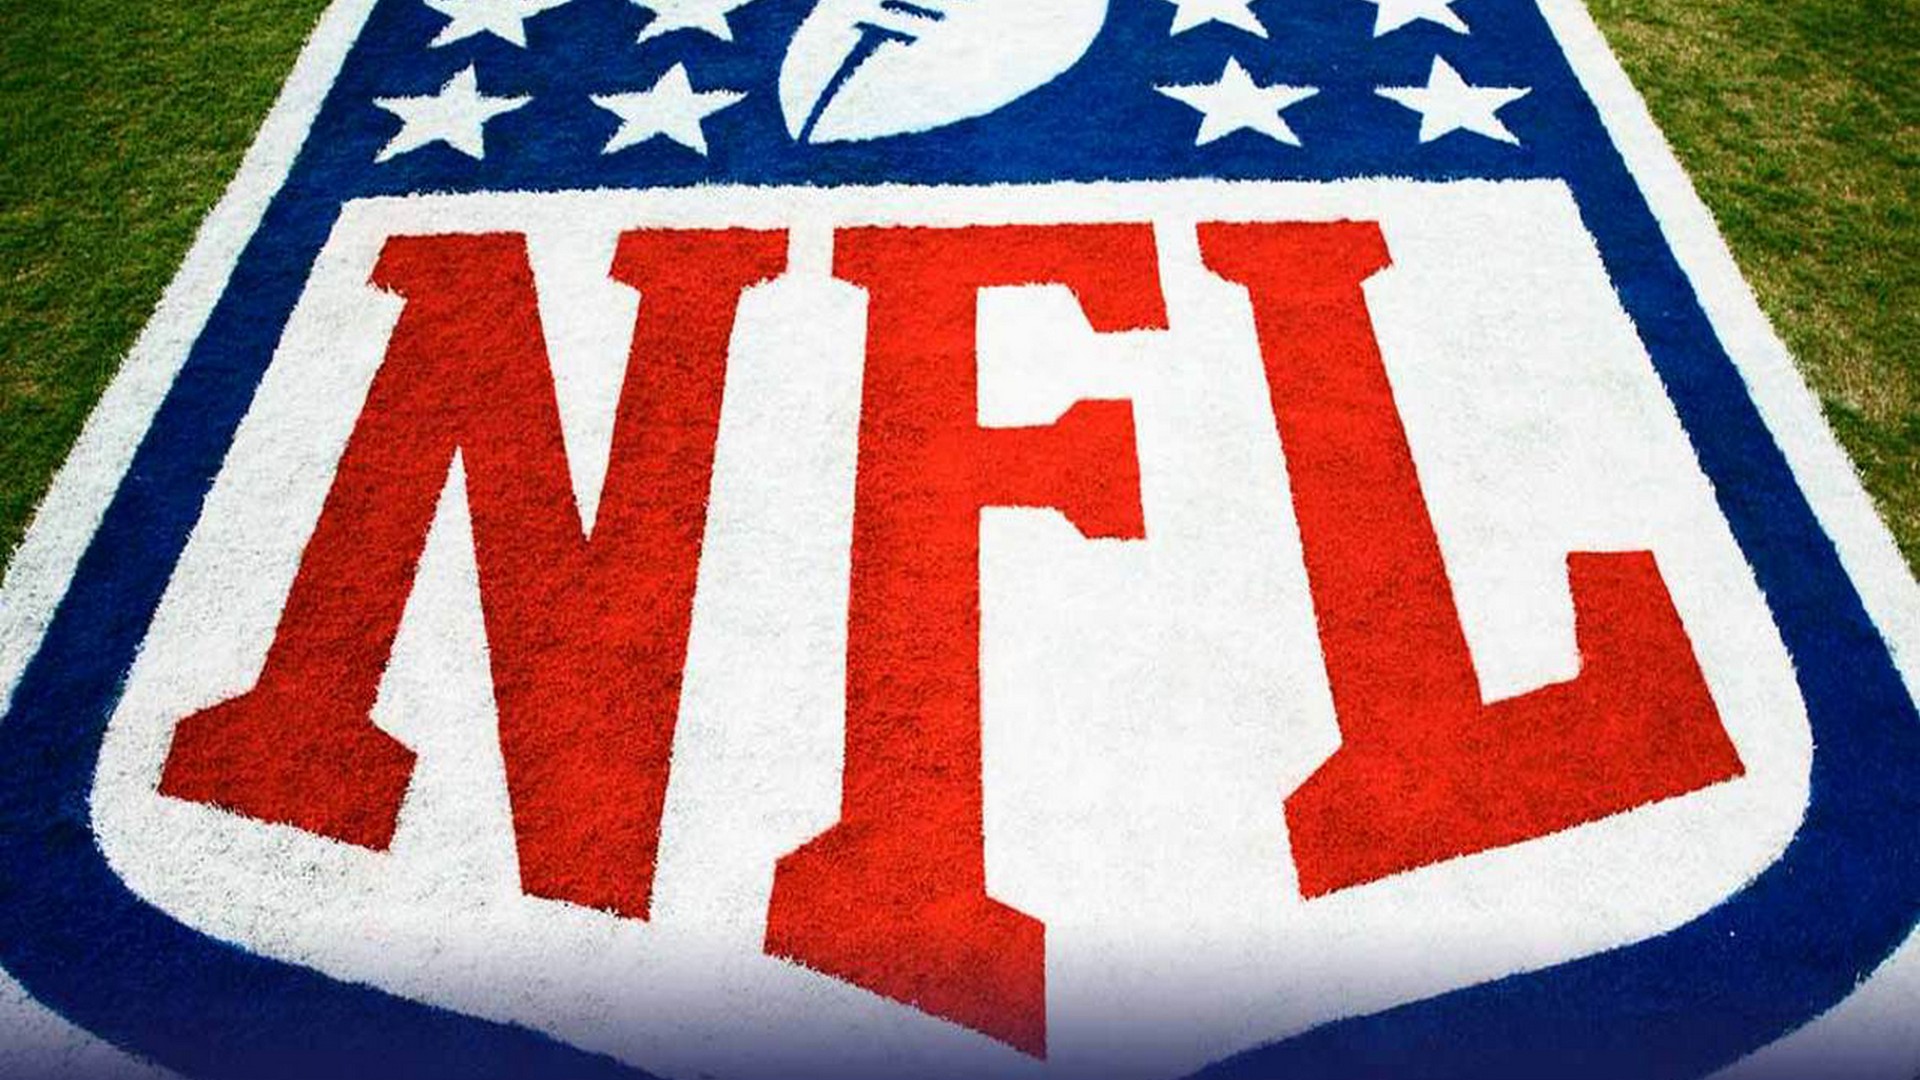 NFL Logo Desktop Wallpapers with high-resolution 1920x1080 pixel. You can use this wallpaper for your Mac or Windows Desktop Background, iPhone, Android or Tablet and another Smartphone device